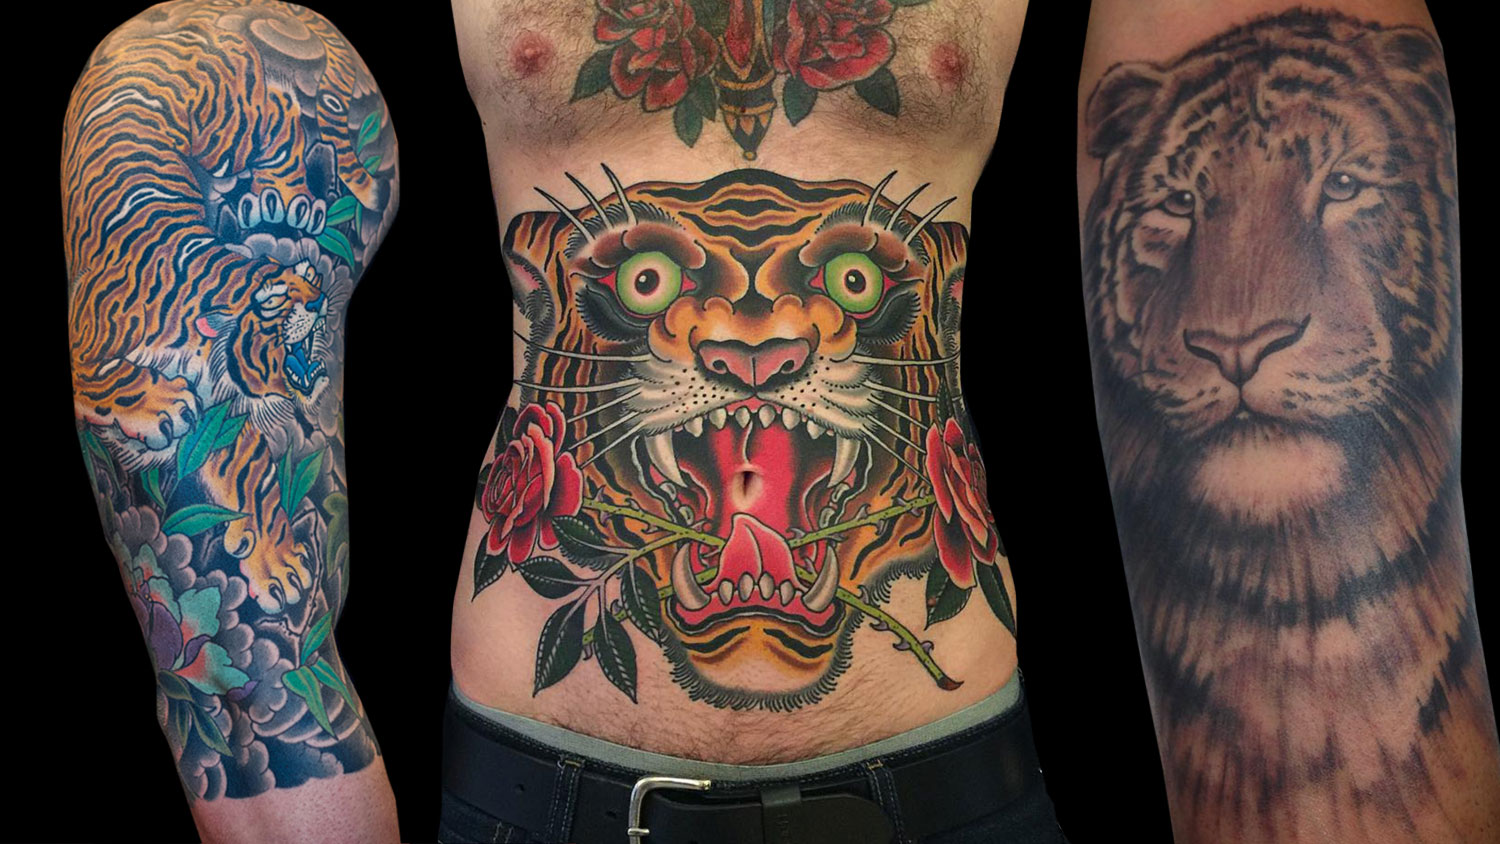 23 Tiger Tattoo Ideas to give you power and strength